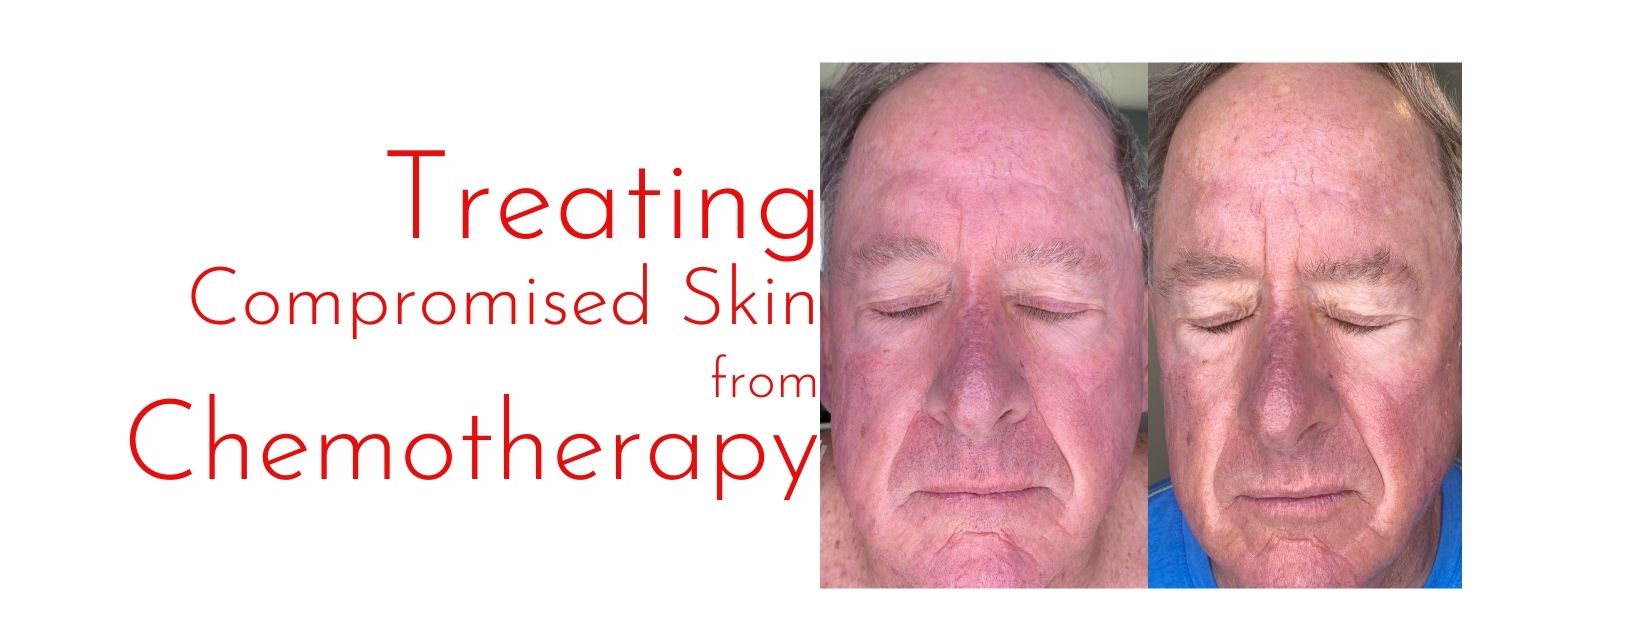 Treatments To Heal Compromised Skin After Topical Chemotherapy